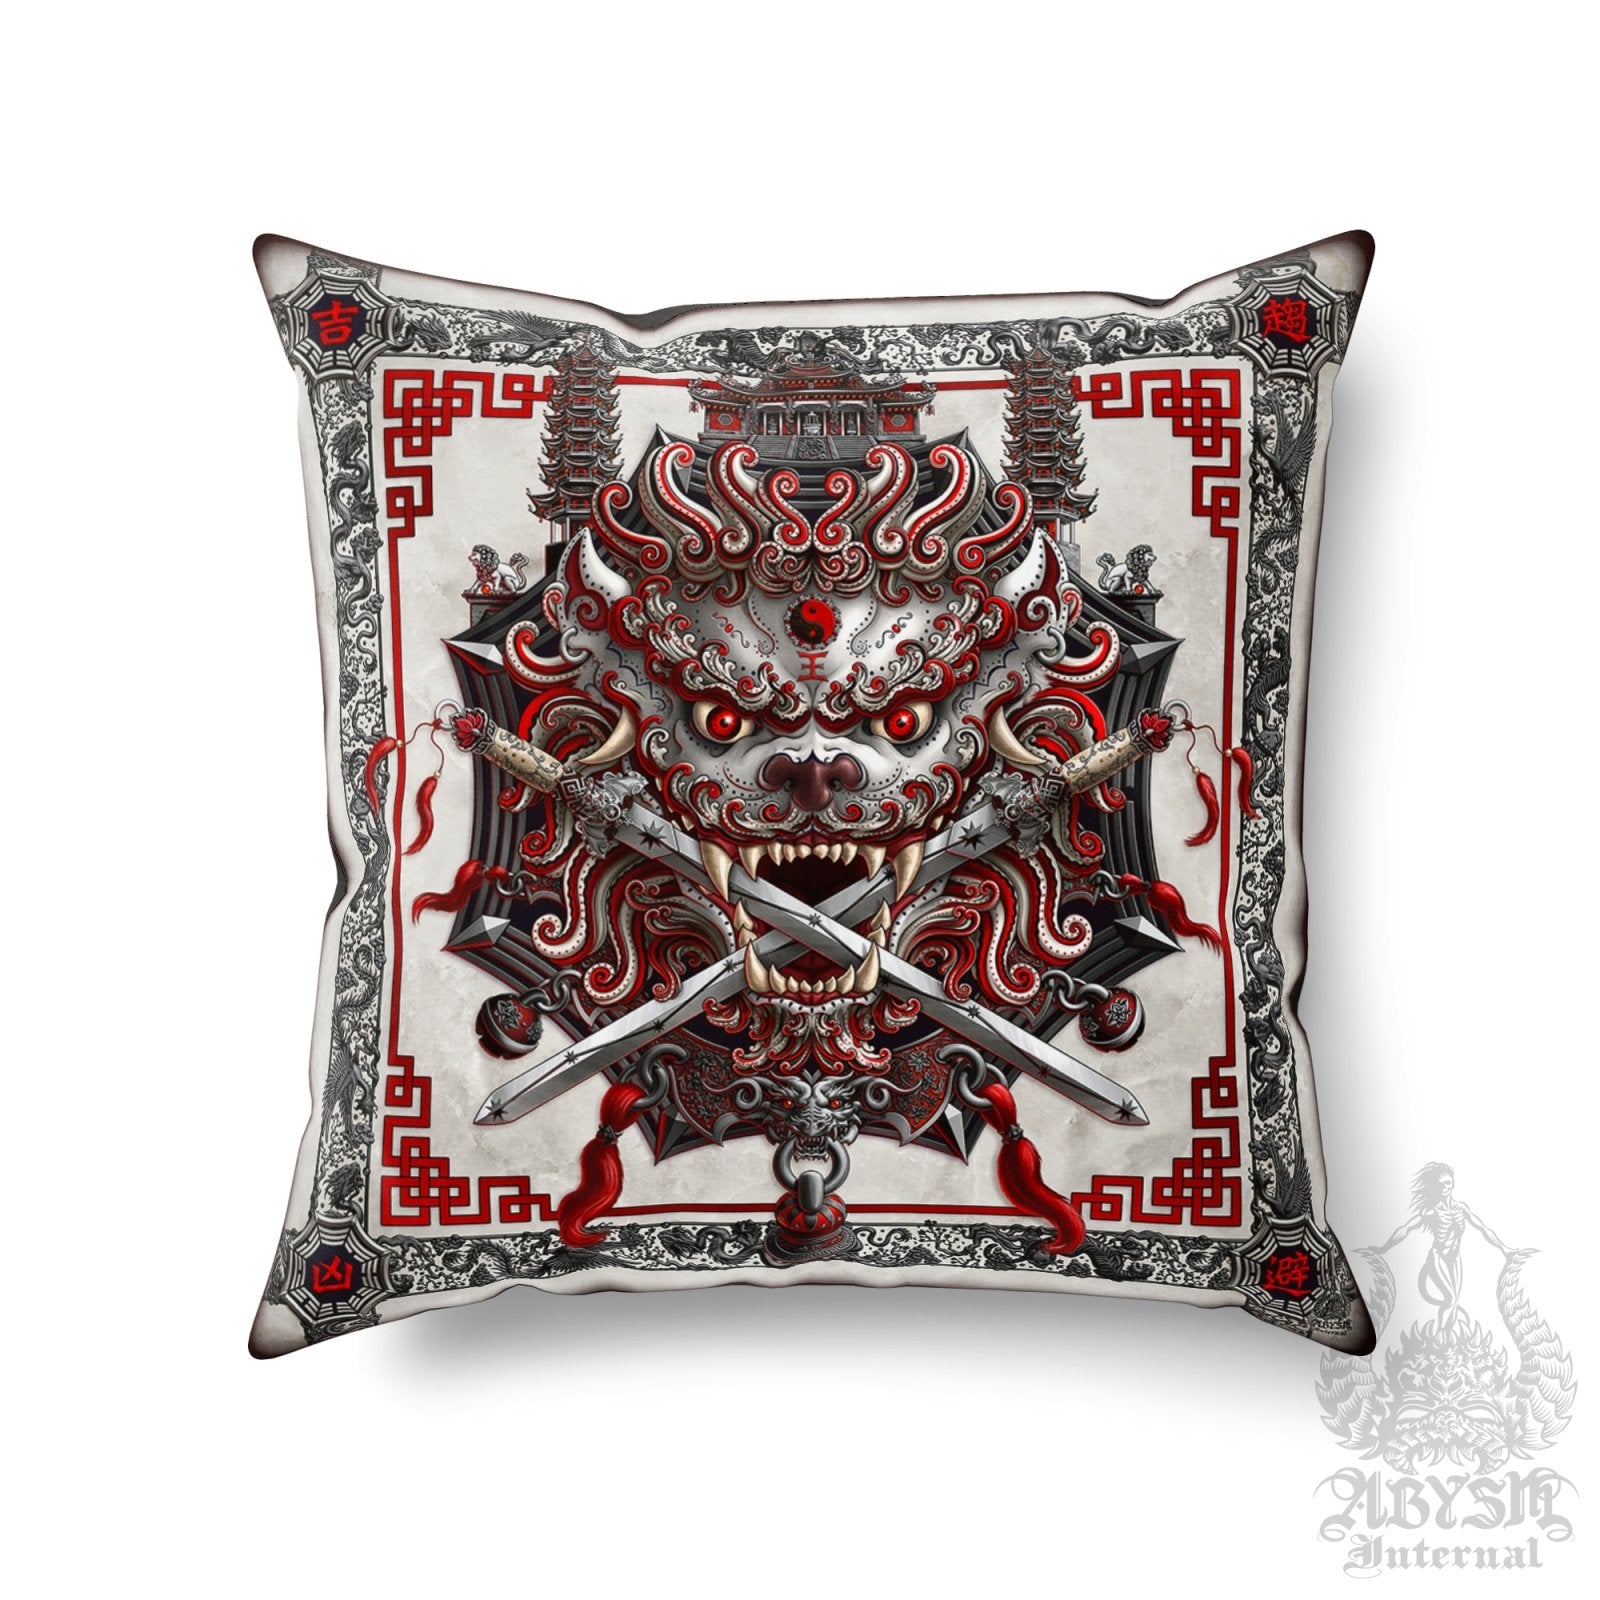 Asian Lion Throw Pillow, Decorative Accent Cushion, Taiwan Sword Lion, Chinese Art, Game Room Decor, Alternative Home - Bloody White Goth - Abysm Internal